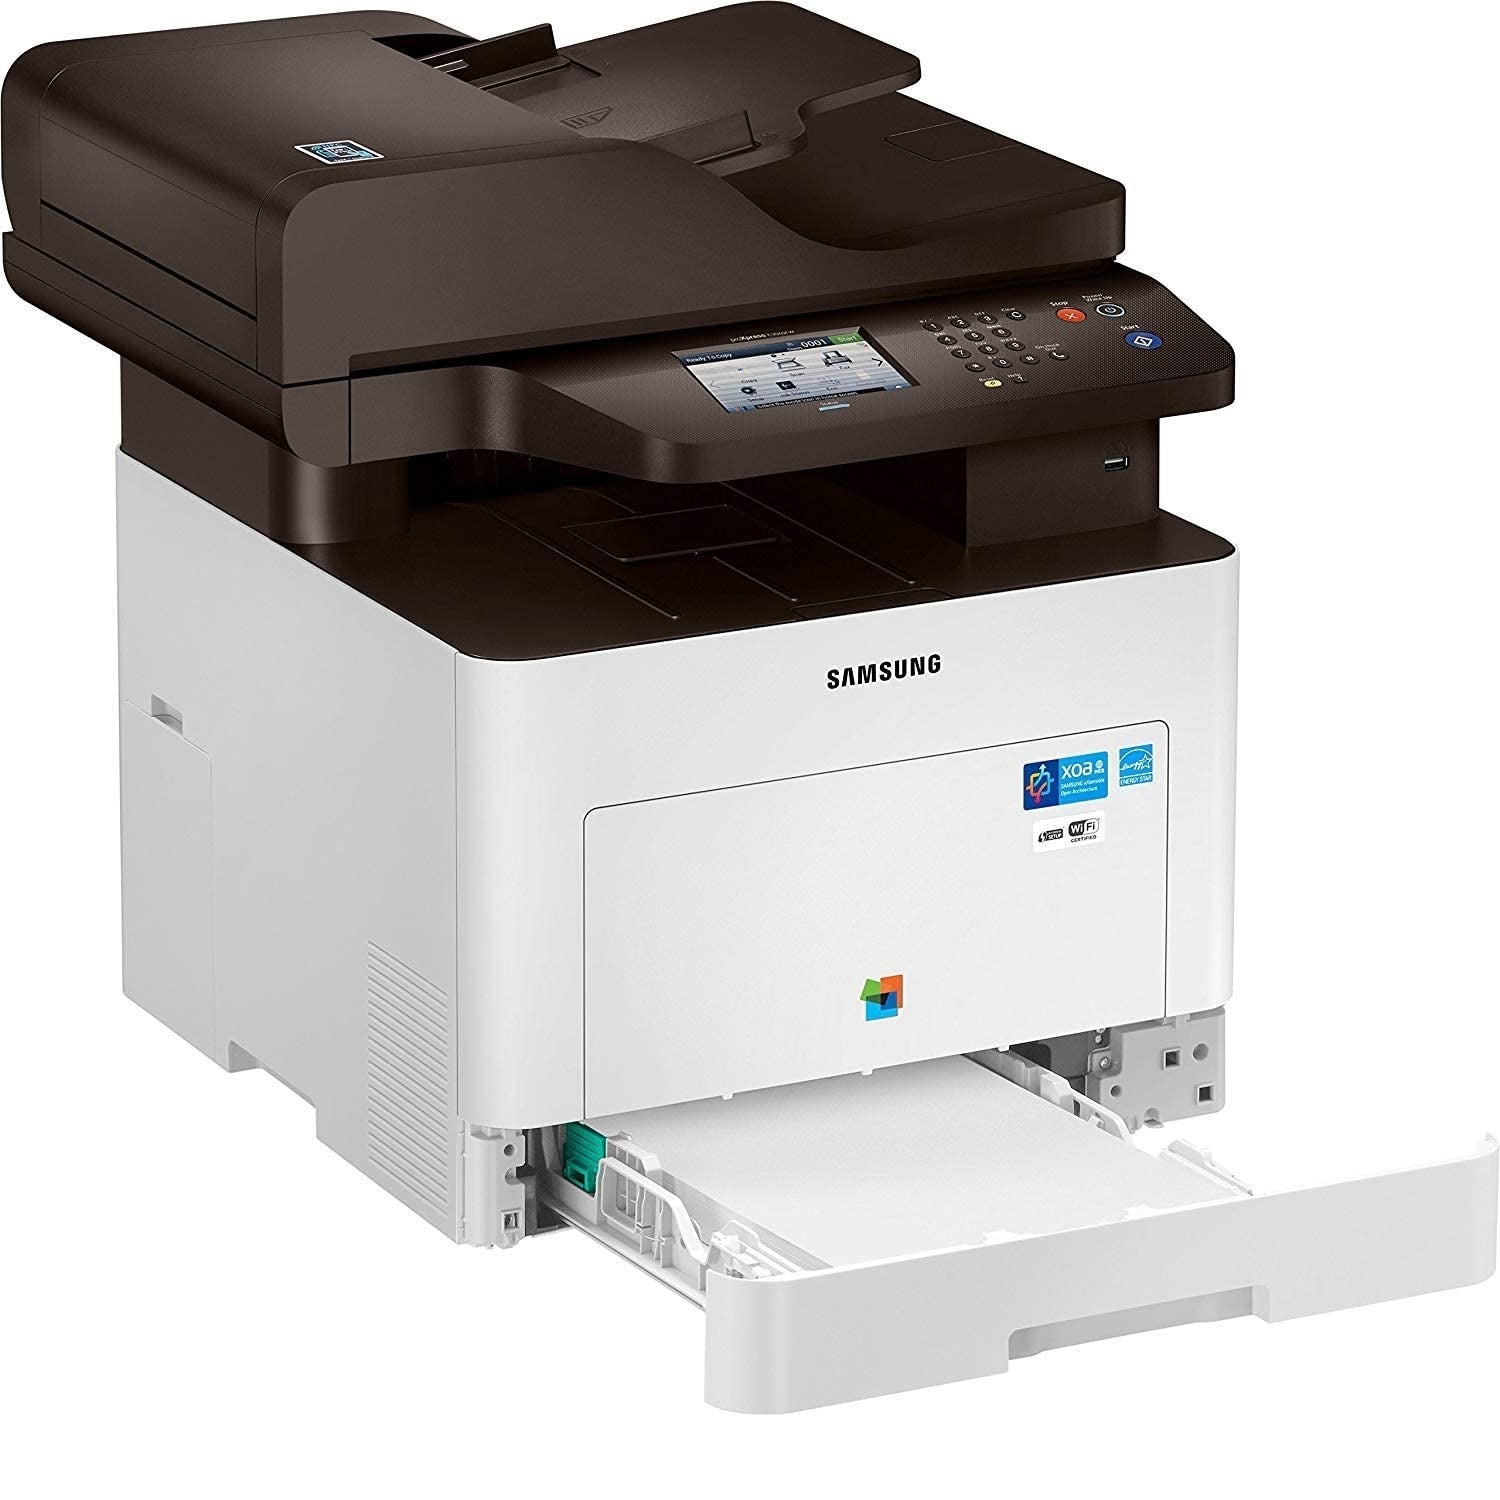 SAMSUNG  ProXpress C3060FW Multifunctional Color Laser Printer, Copier, Scanner with Wireless & Mobile Connectivity and Print Security on Sale by Absolute Toner